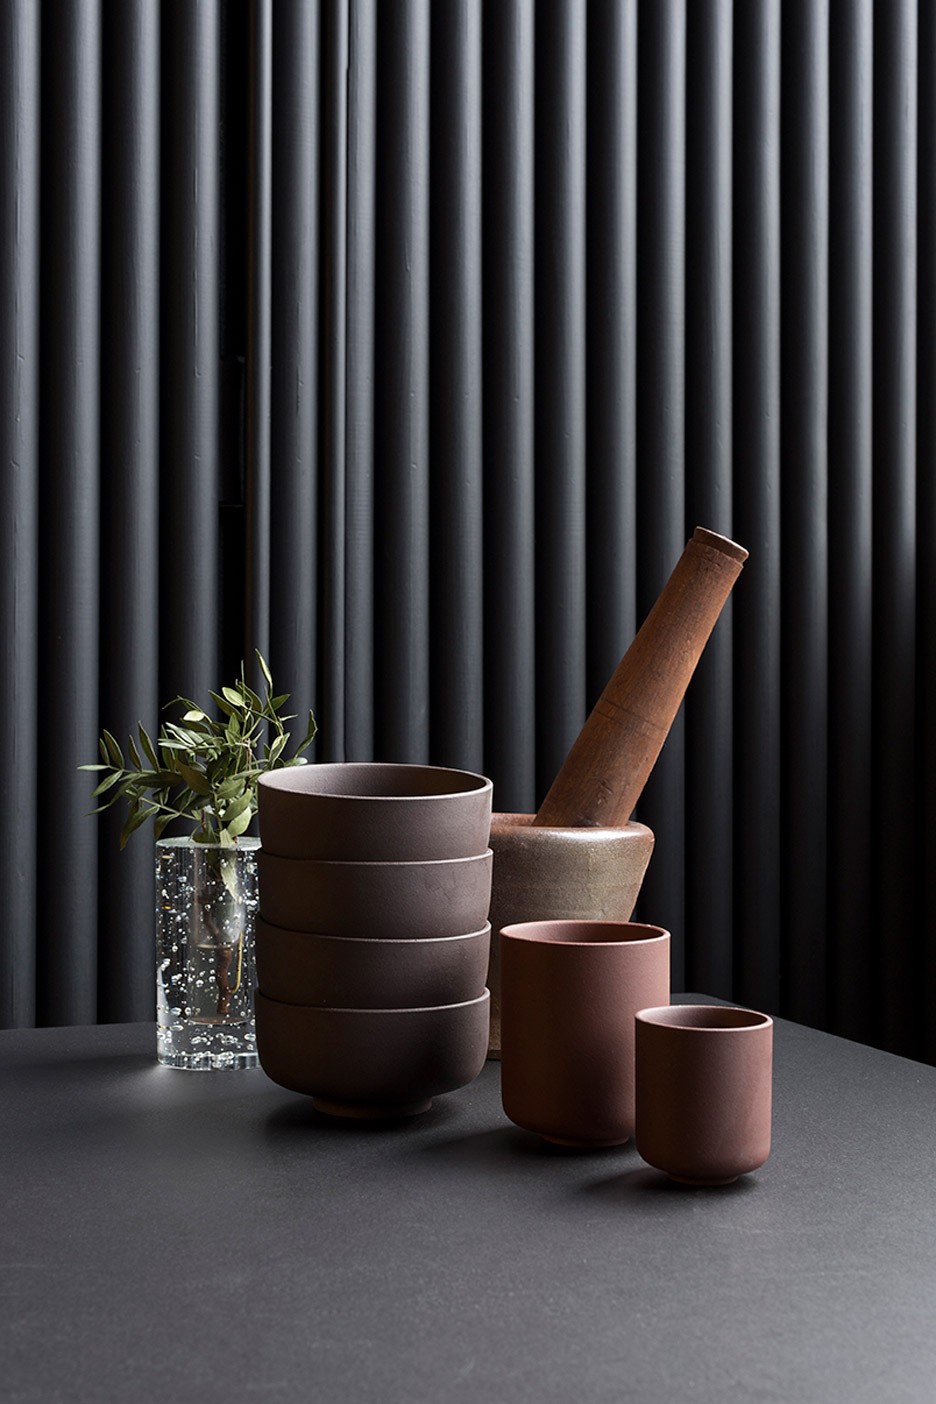 Meet This Mesmerizing Copenhagen Restaurant With Asian And Nordic Inspirations | The Danish homeware brand known as Ferm Living was the head thinker of this marvelous restaurant design. #interiordesign #restaurantdesign #restaurantdecor #interiordecor #designproject